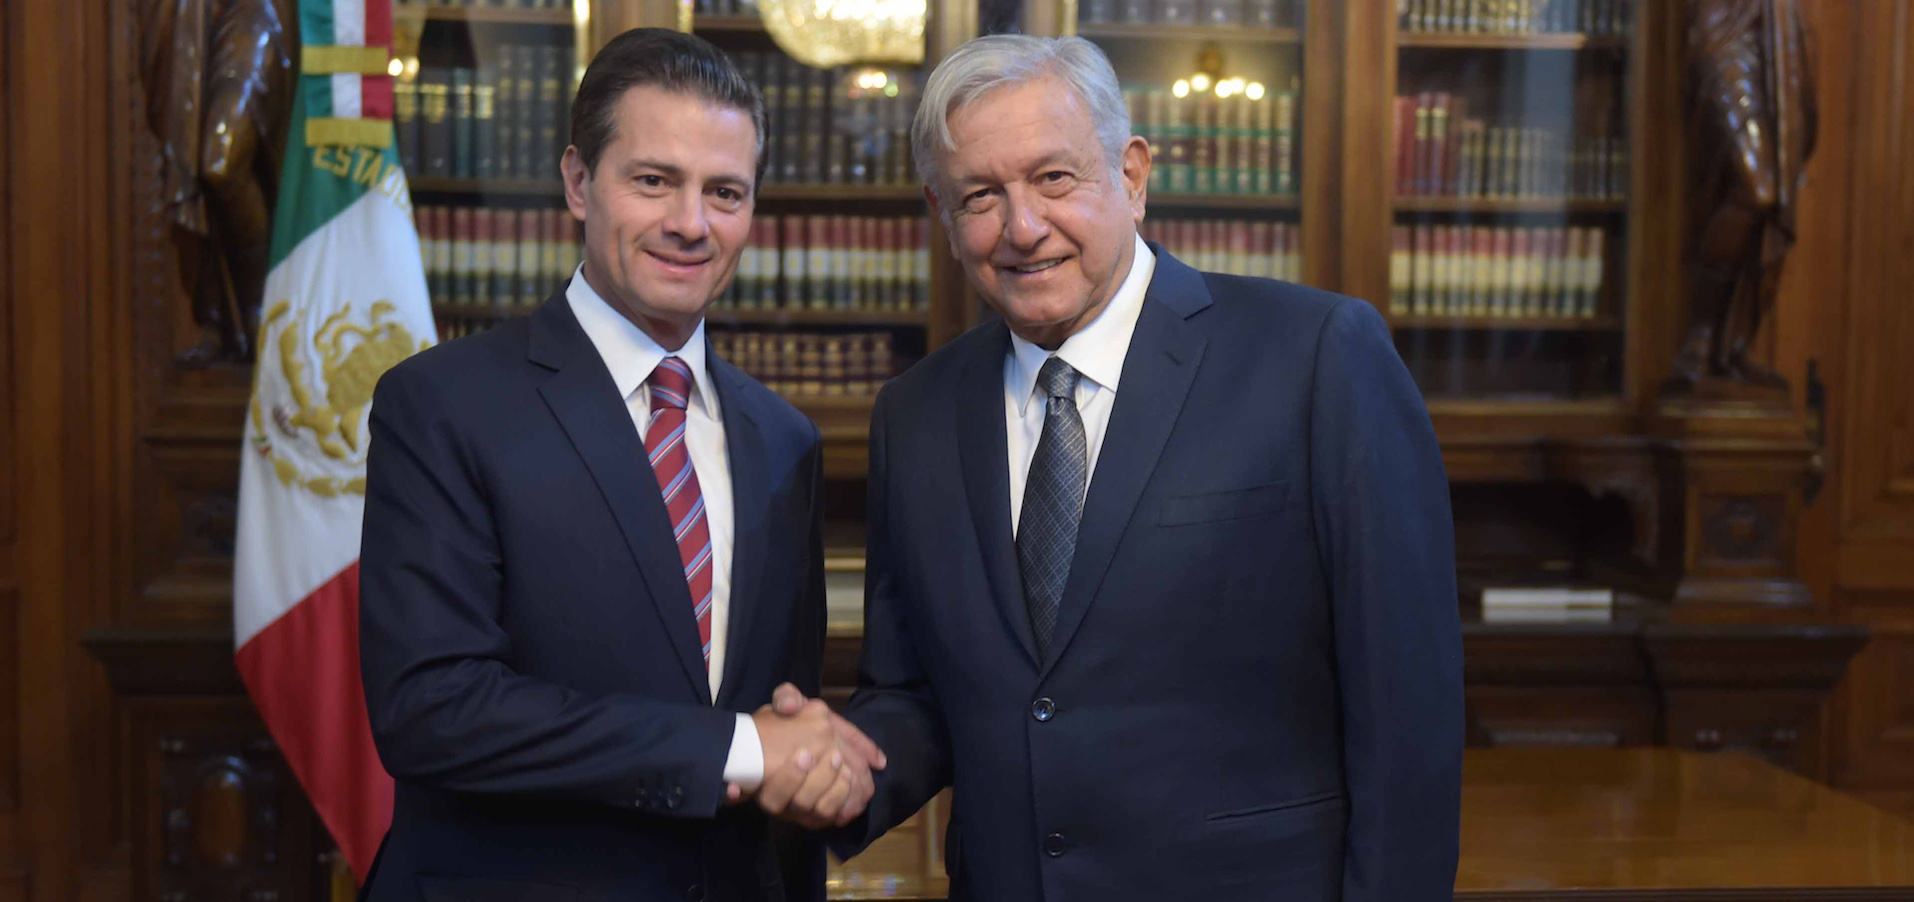 An energy reform was an important issue in the last Mexican presidential elections. The upcoming president campaigned on the promise to stop the privatization process of the energy sector and the liberalization of gasoline prices. Will he succeed? 